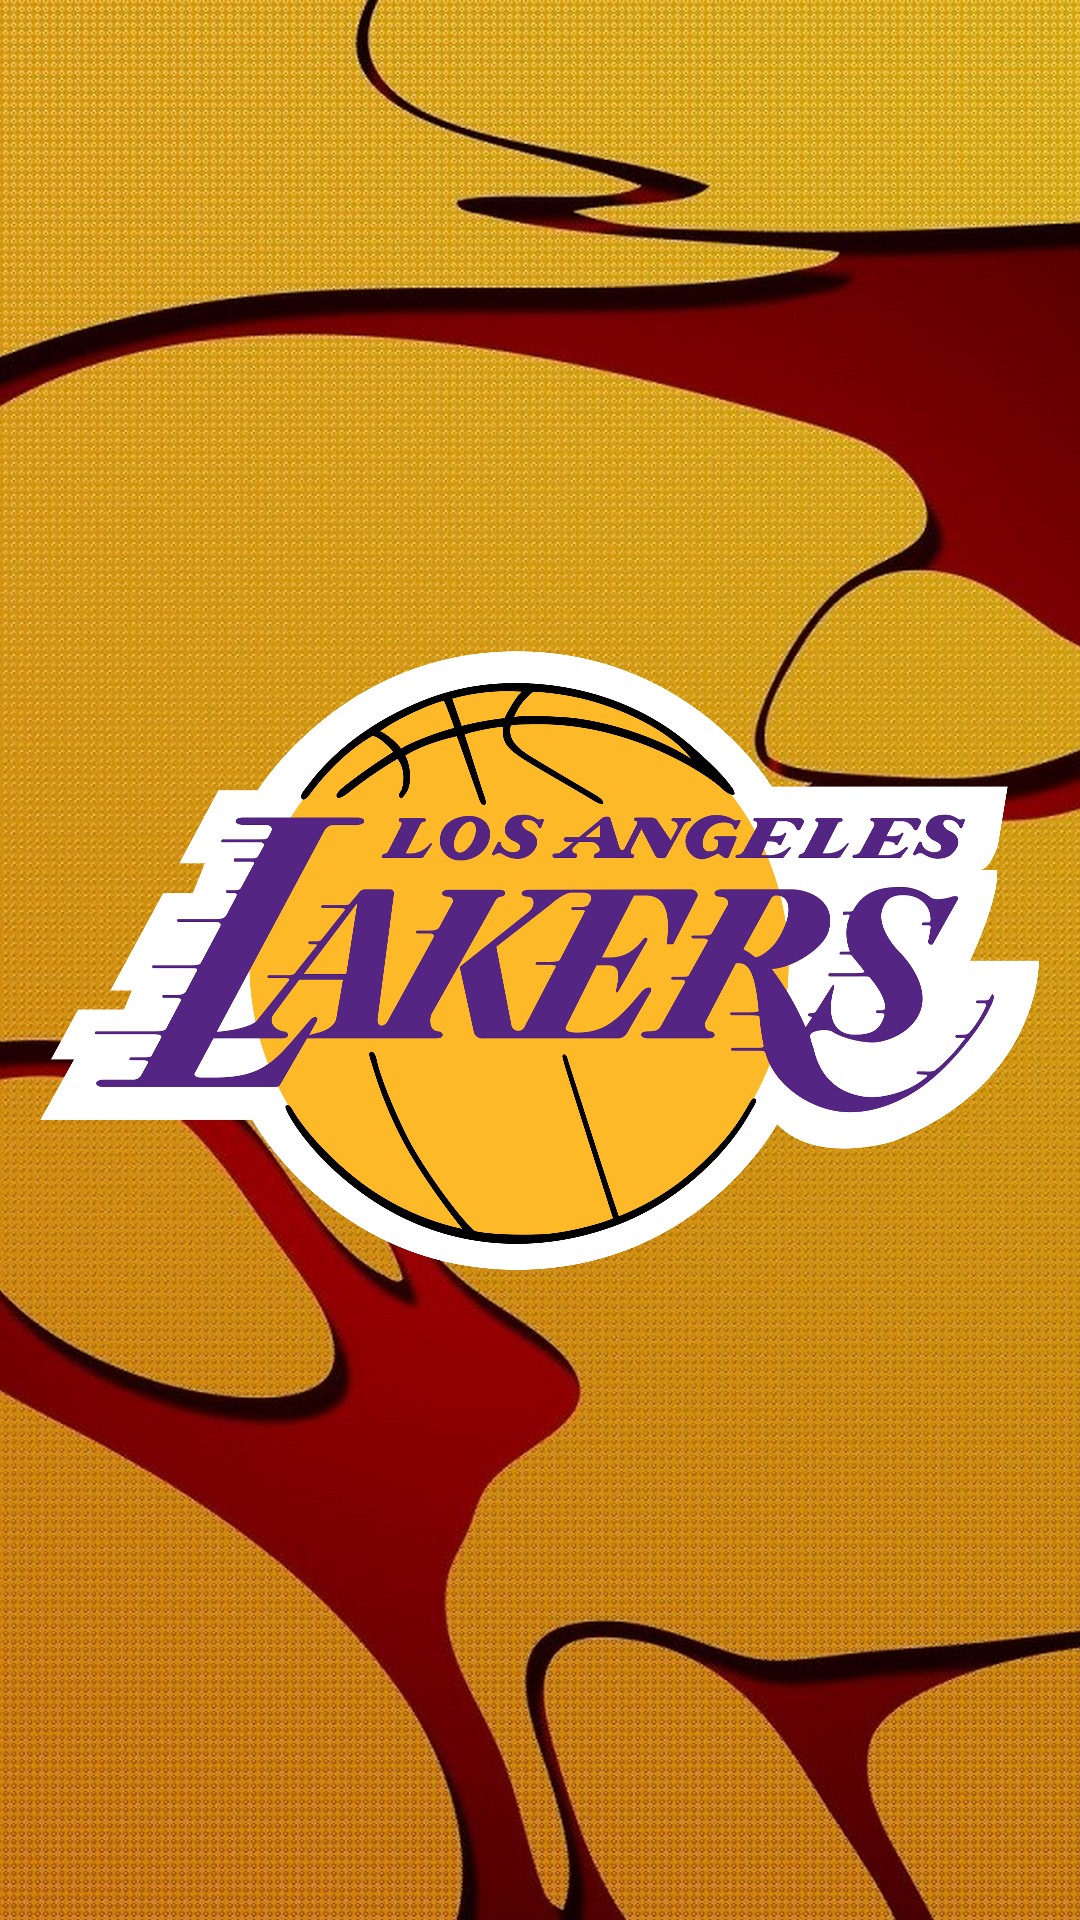 La Lakers Iphone 6s Plus Wallpaper With High-resolution - Poster - HD Wallpaper 